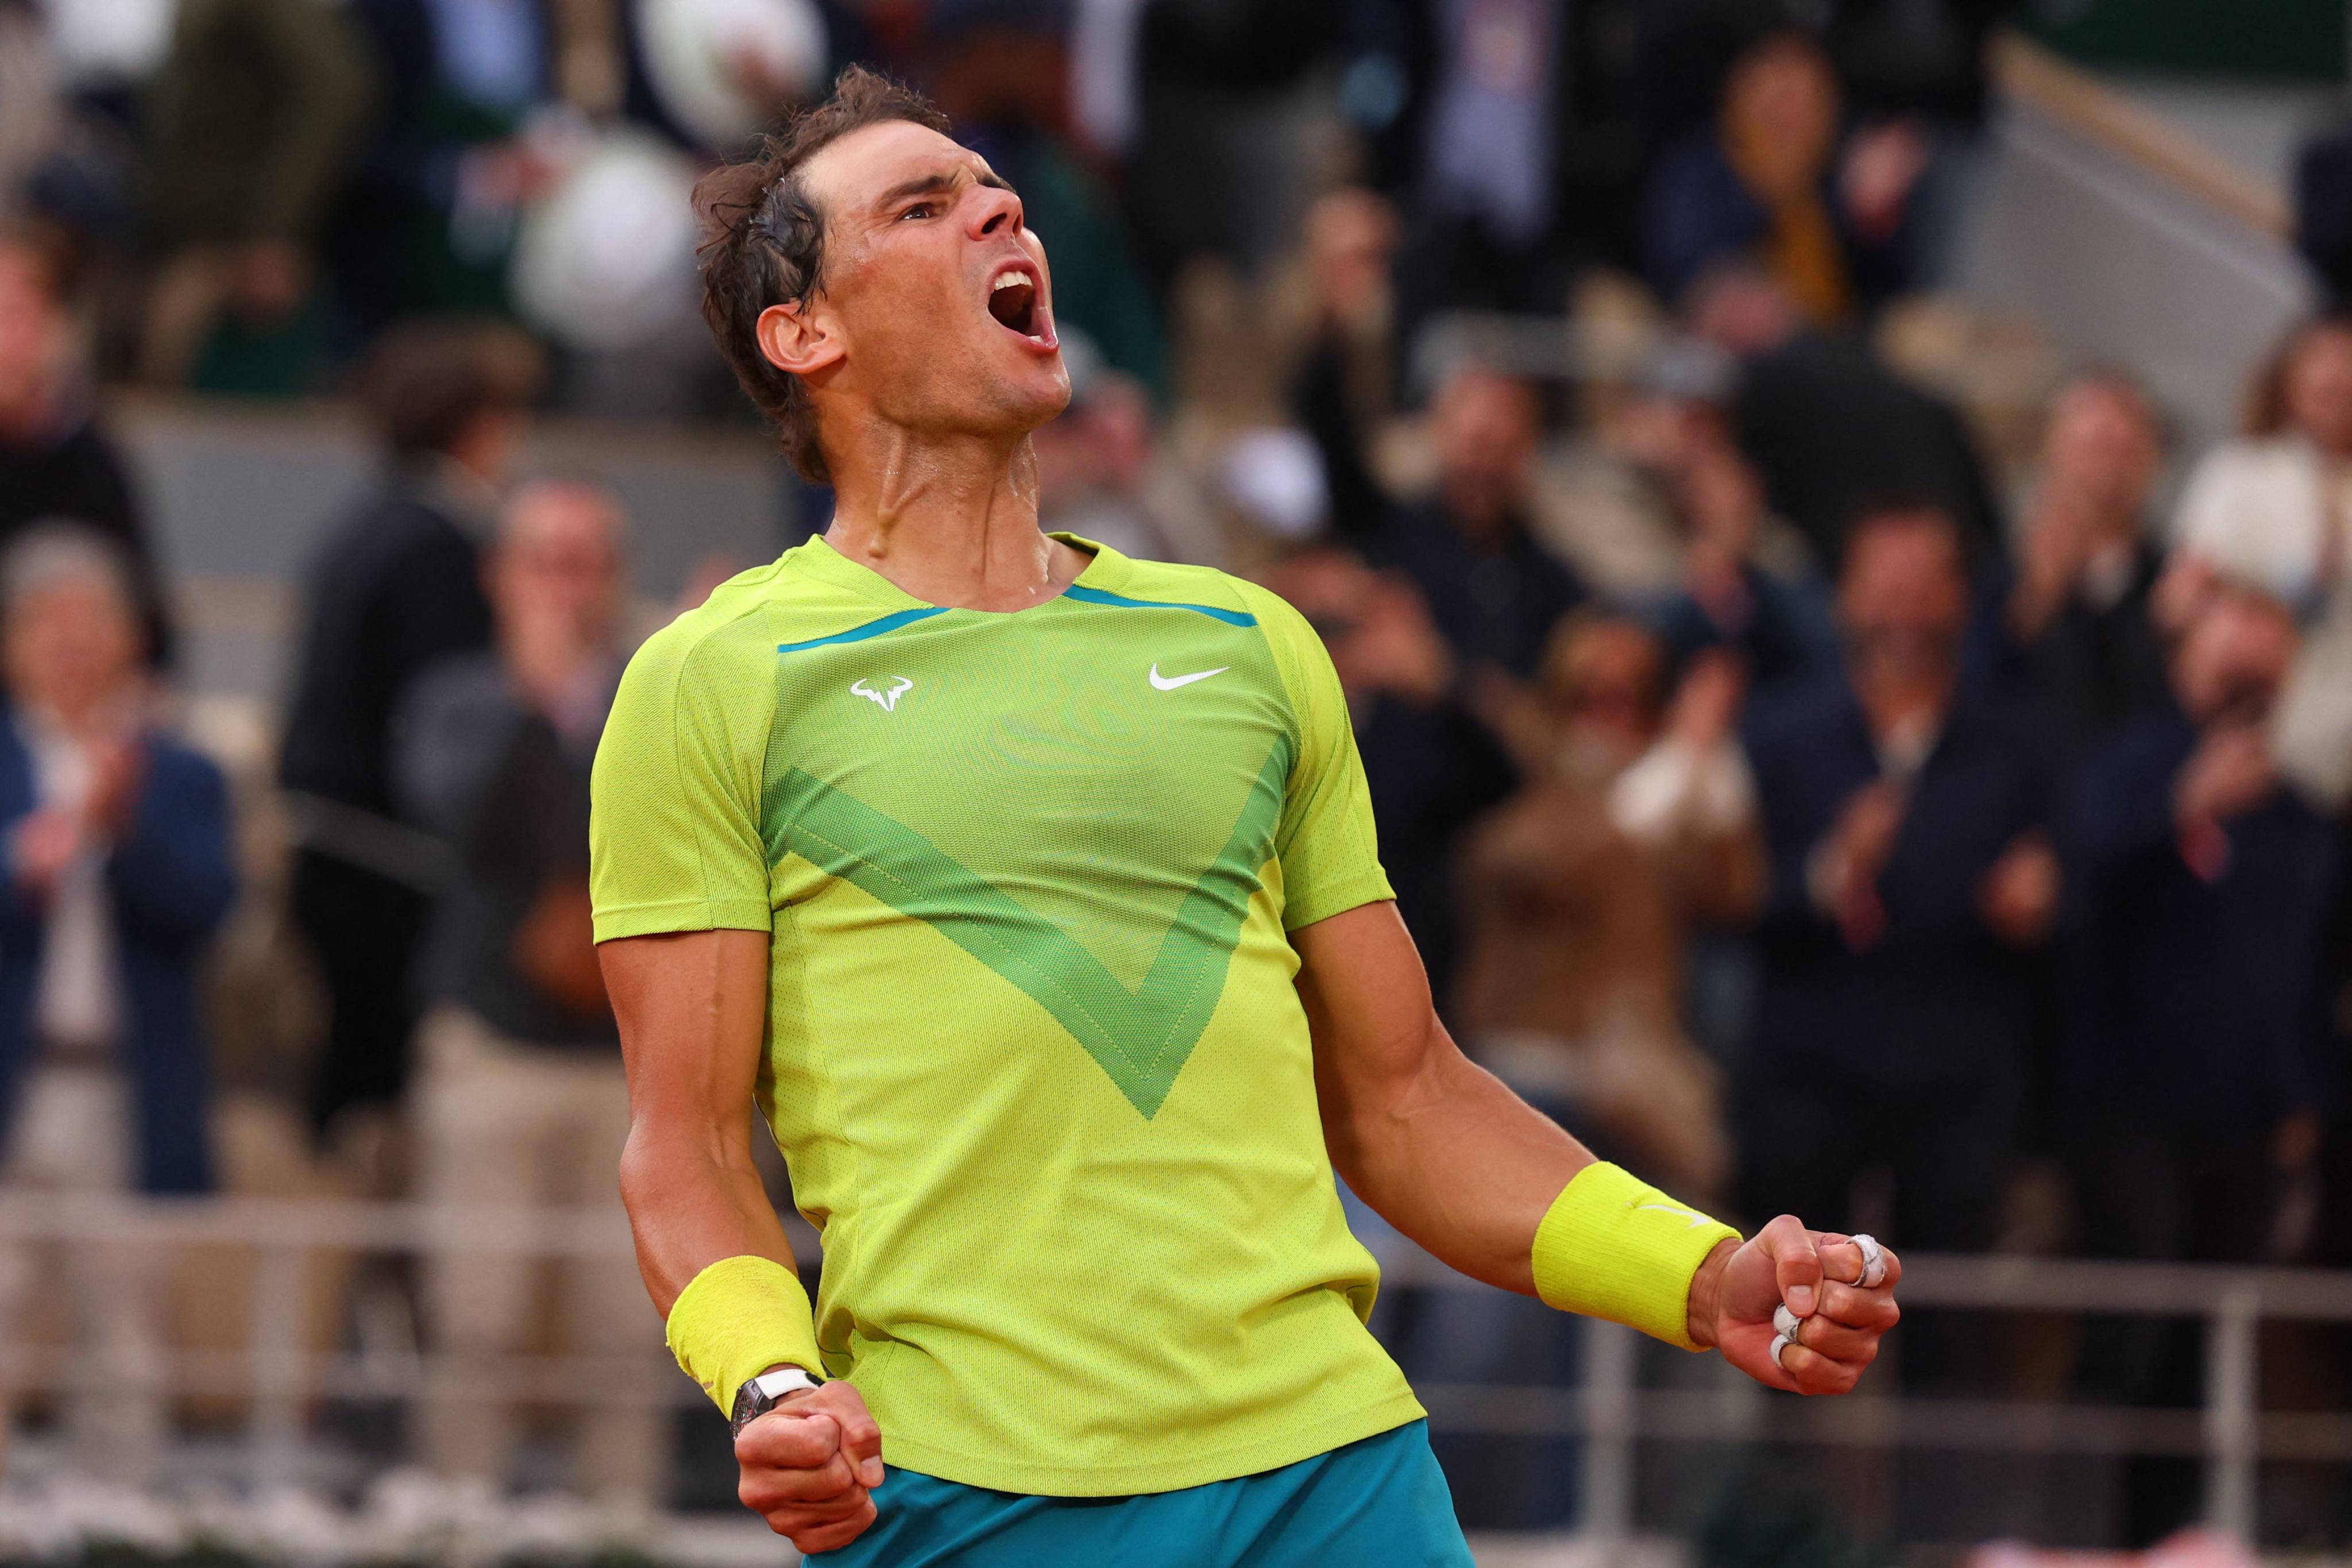 Nadal will play Novak Djokovic in the French Open quarter finals after beating Felix Auger-Aliassime. Photo: AFP